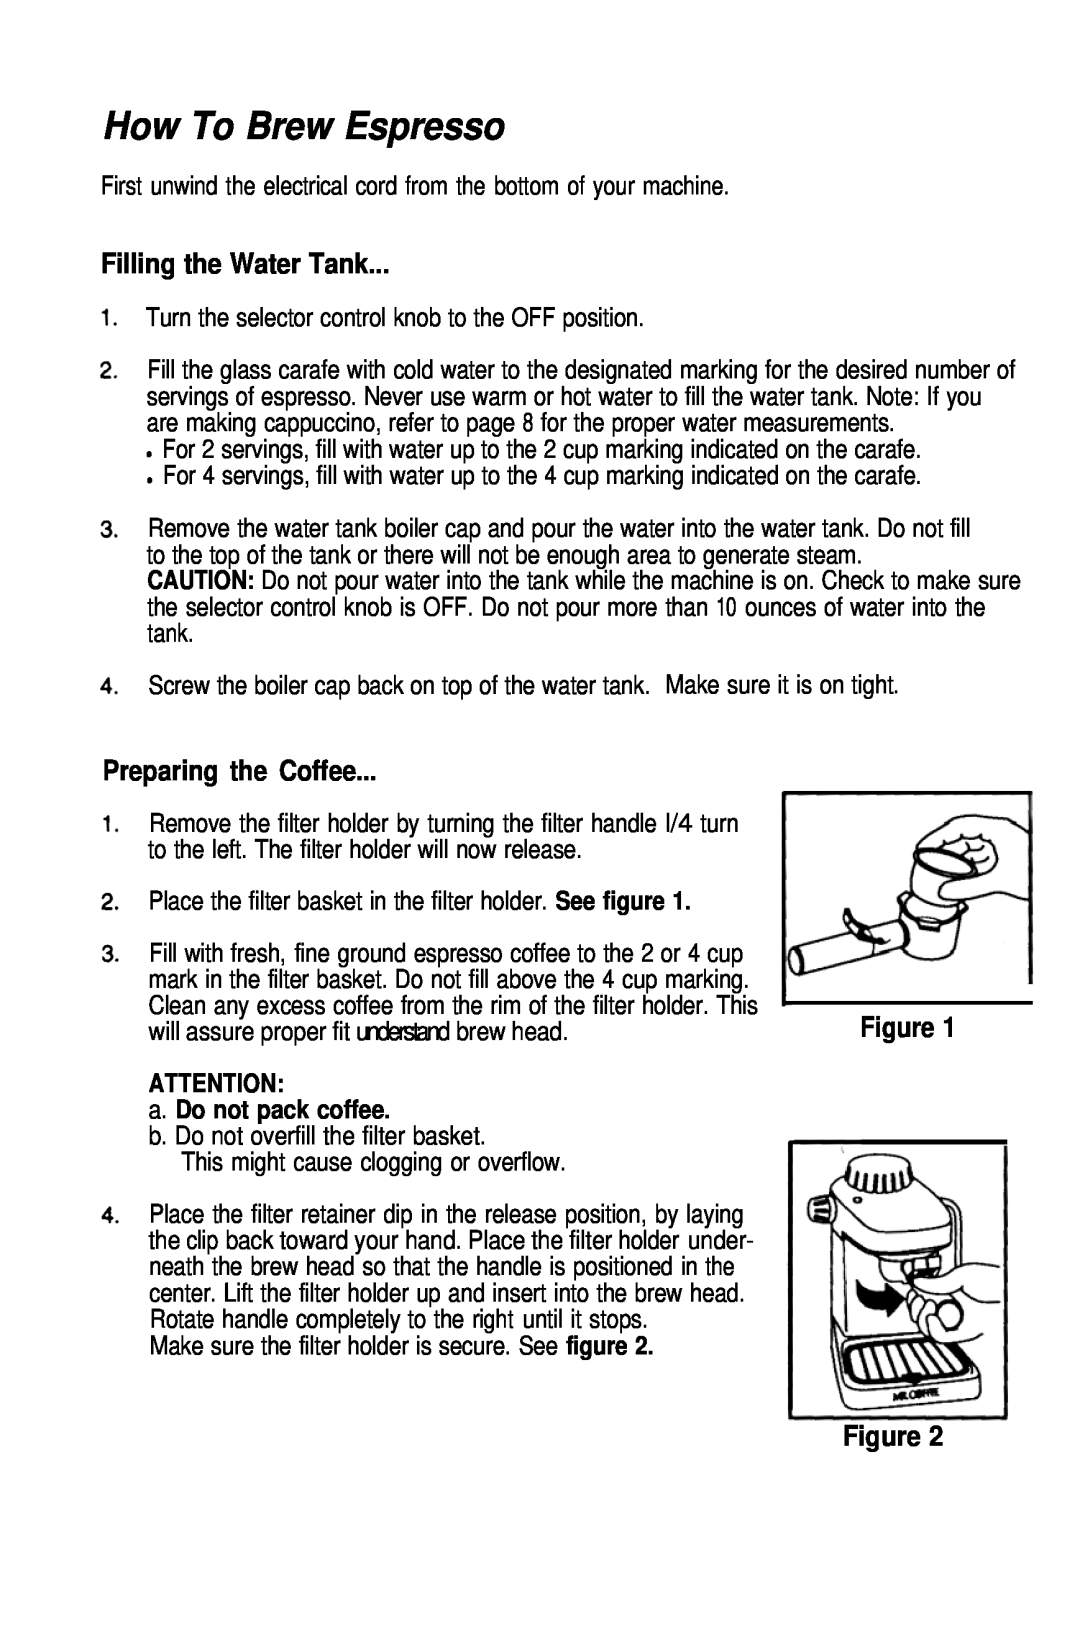 Mr. Coffee ECM9 manual How To Brew Espresso, Filling the Water Tank, Preparing the Coffee, a. Do not pack coffee 